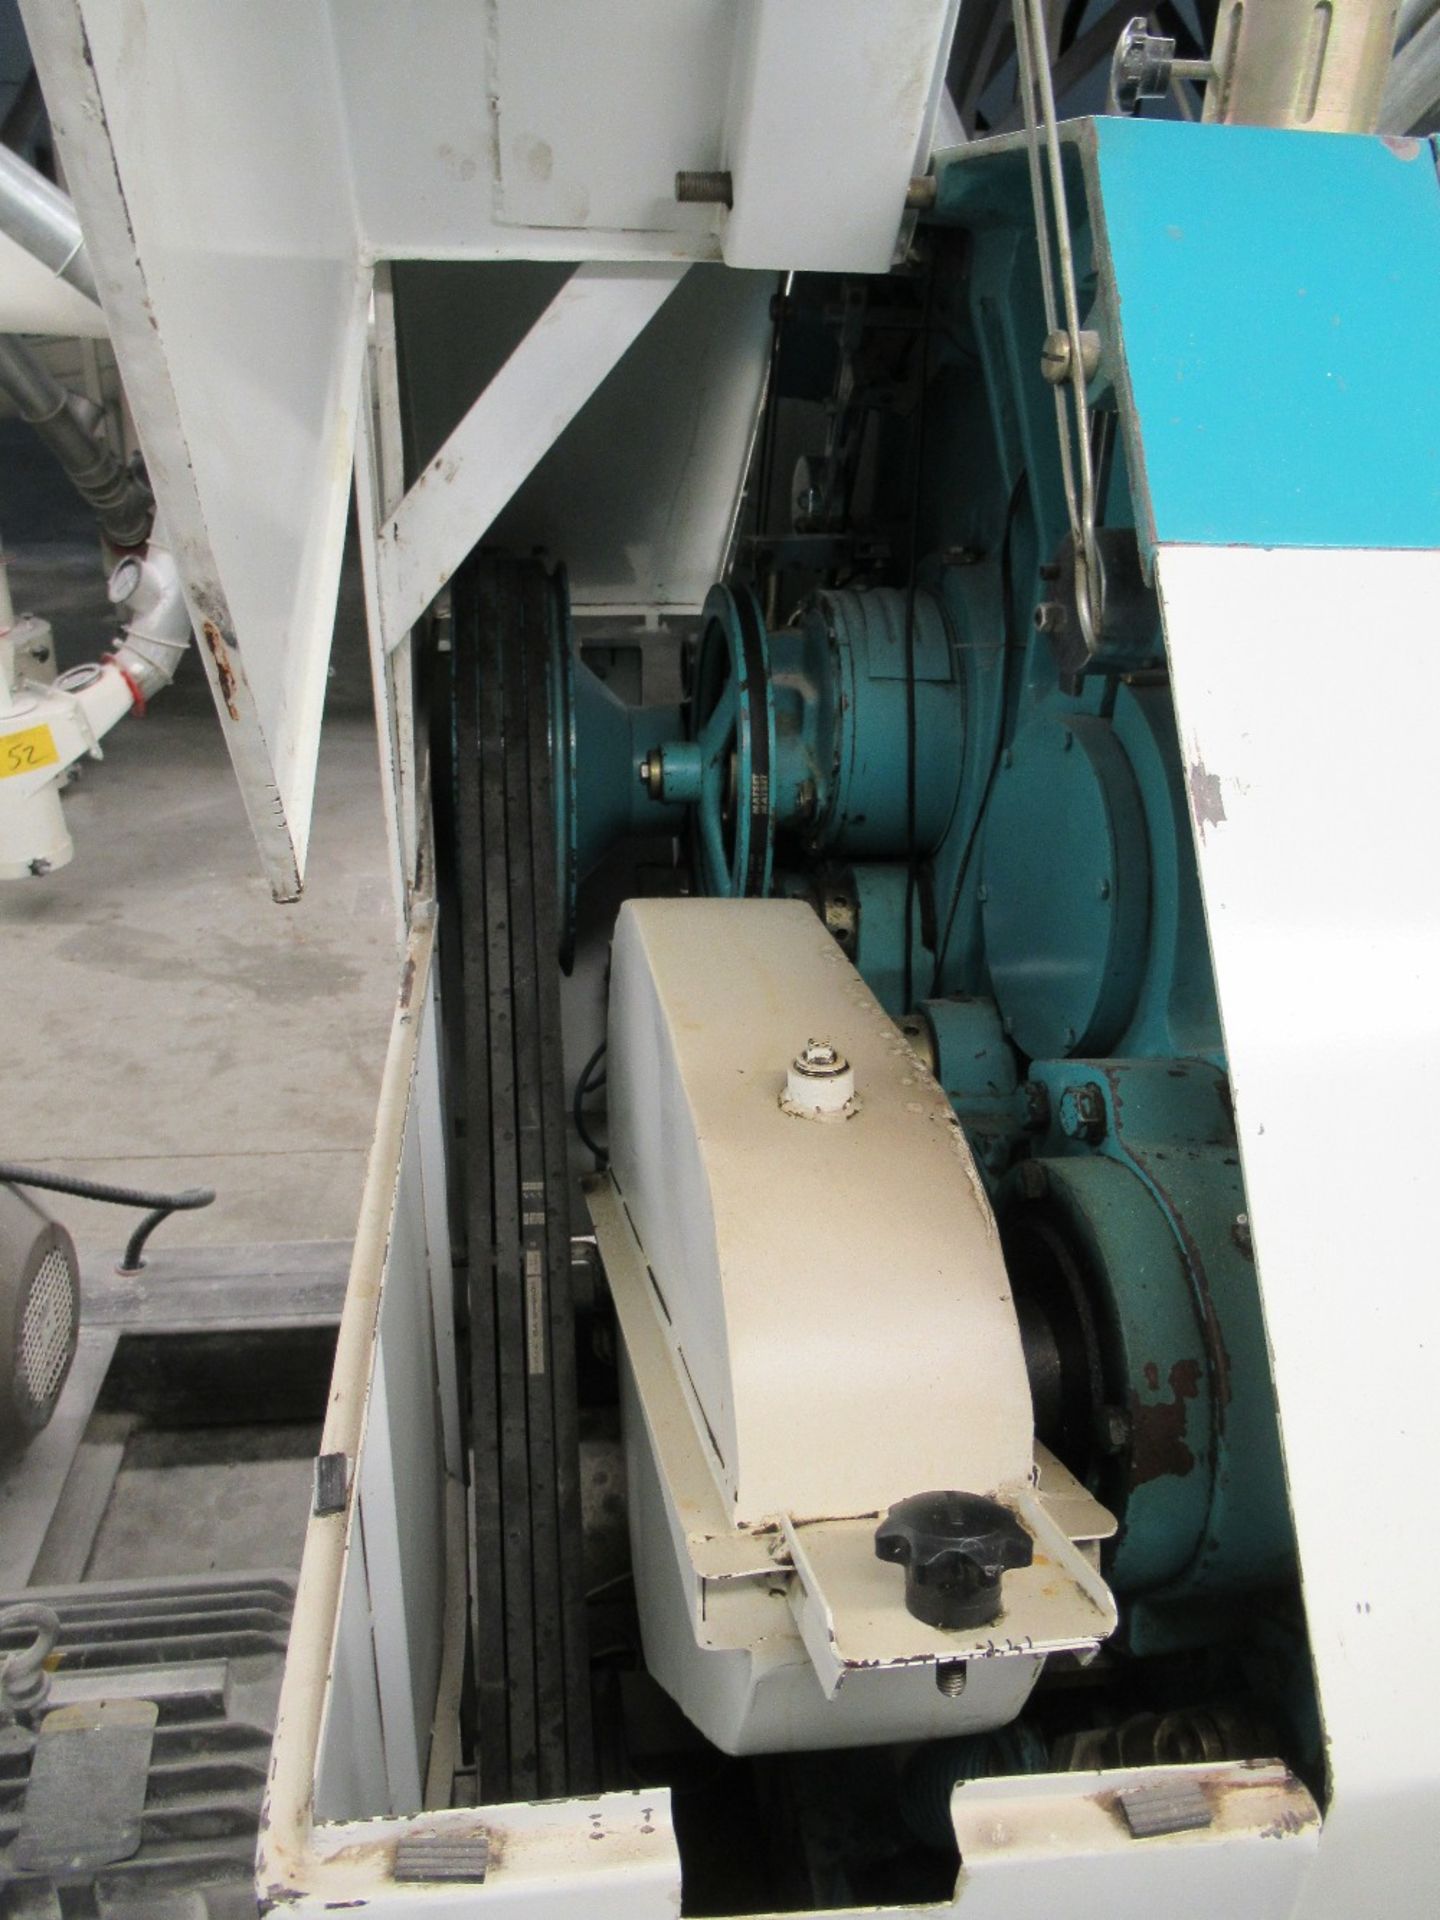 2001 INDOPOL MM-1PRM04, 40"X10" APPROX. DOUBLE ROLLER GRINDING MILL, 1 - 20 HP, 1 - 15 HPMOTORS S/N: - Image 3 of 5